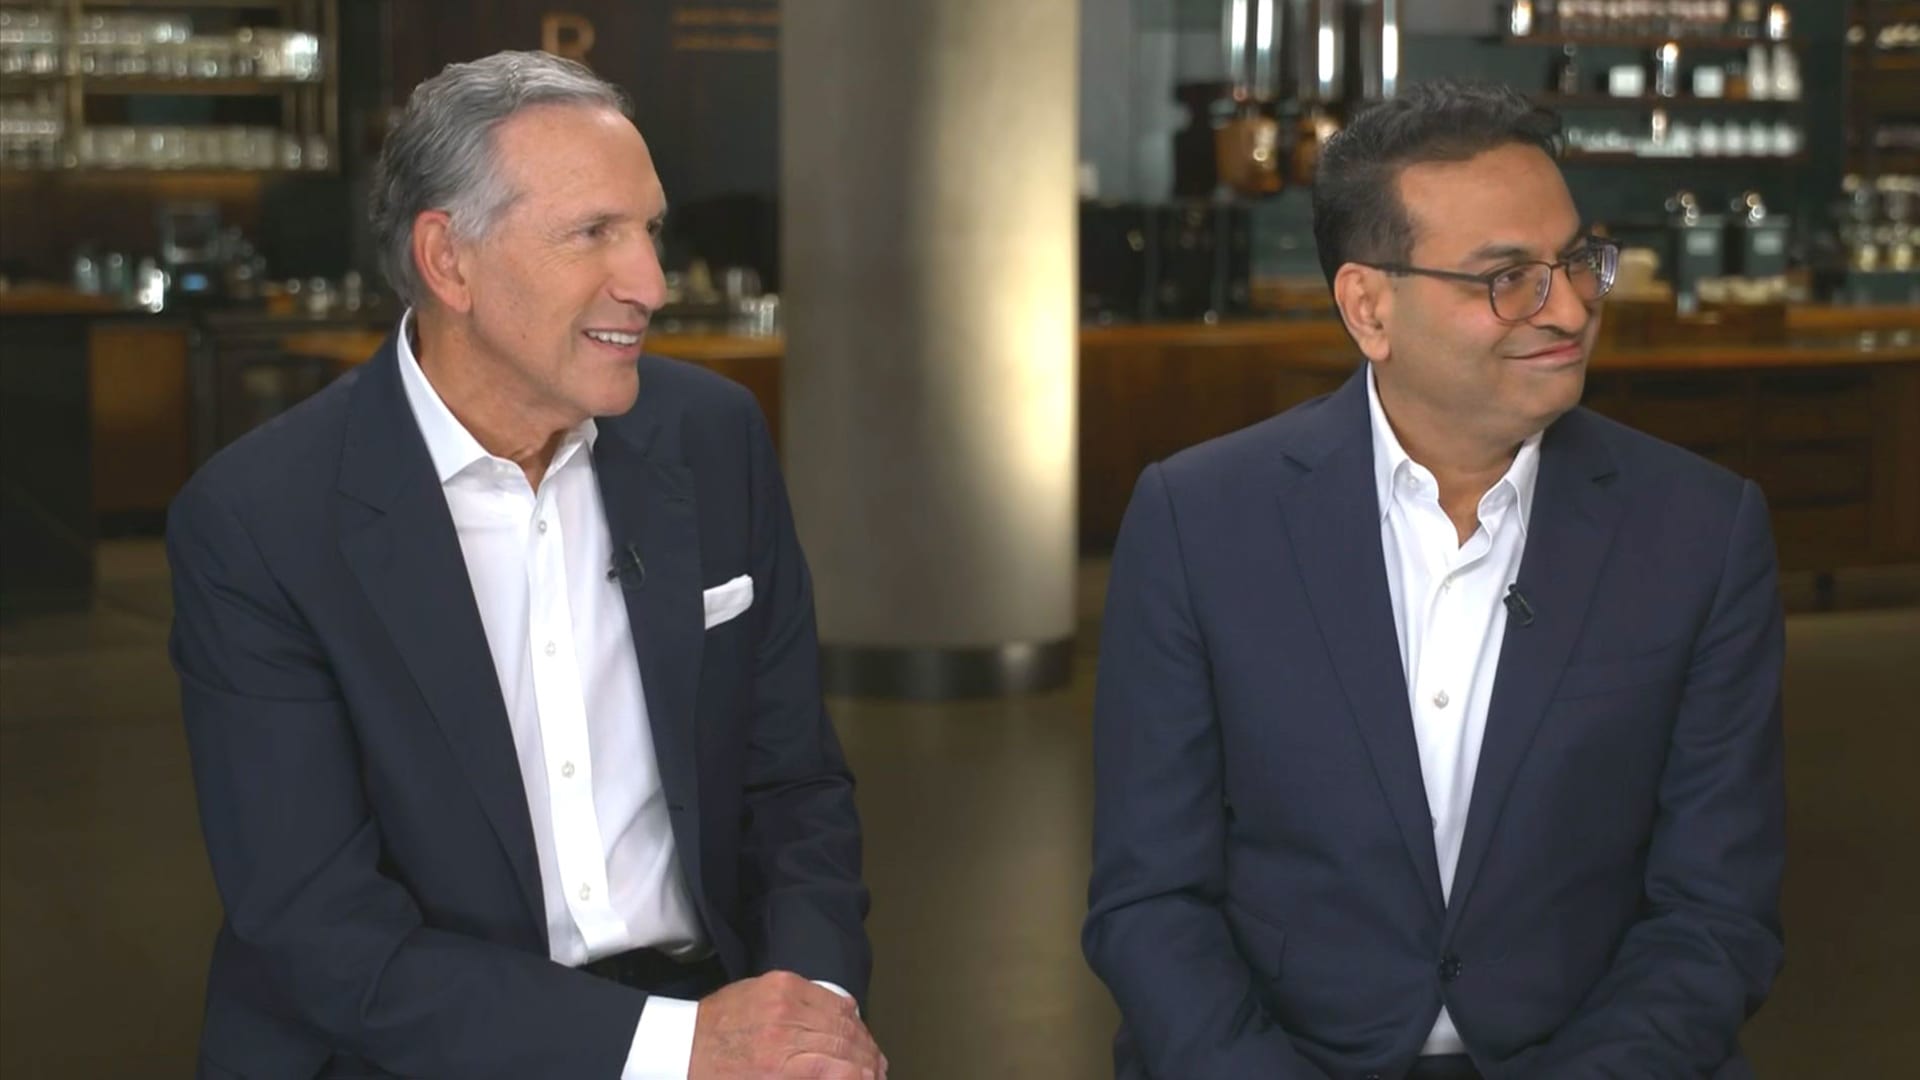 Photo of New Starbucks CEO Laxman Narasimhan takes over nearly two weeks earlier than expected